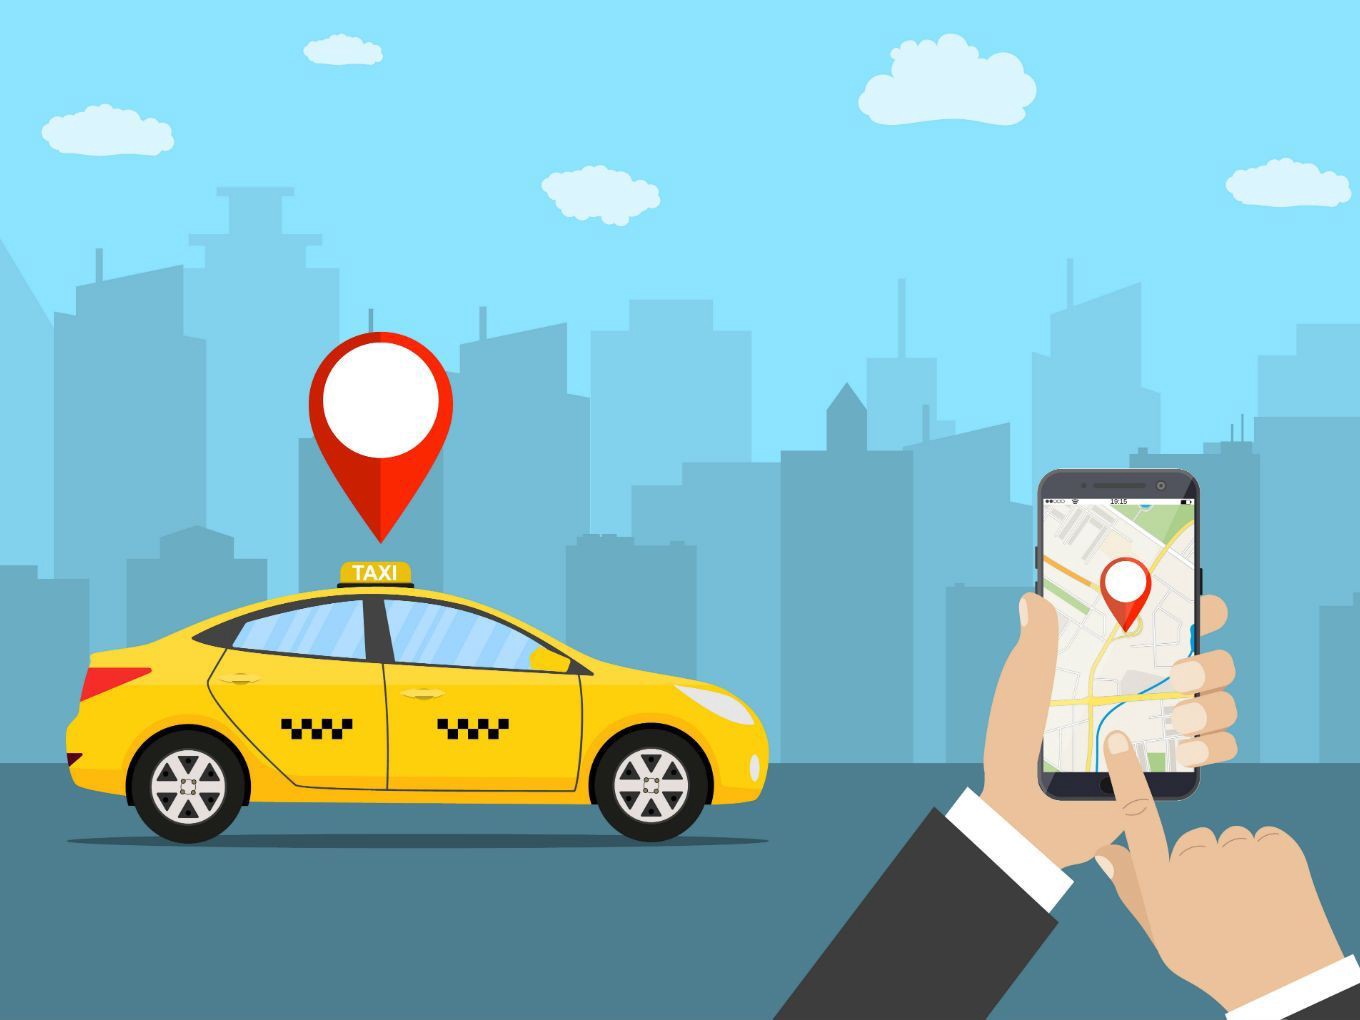 Why people should consider ridesharing compared to taxis